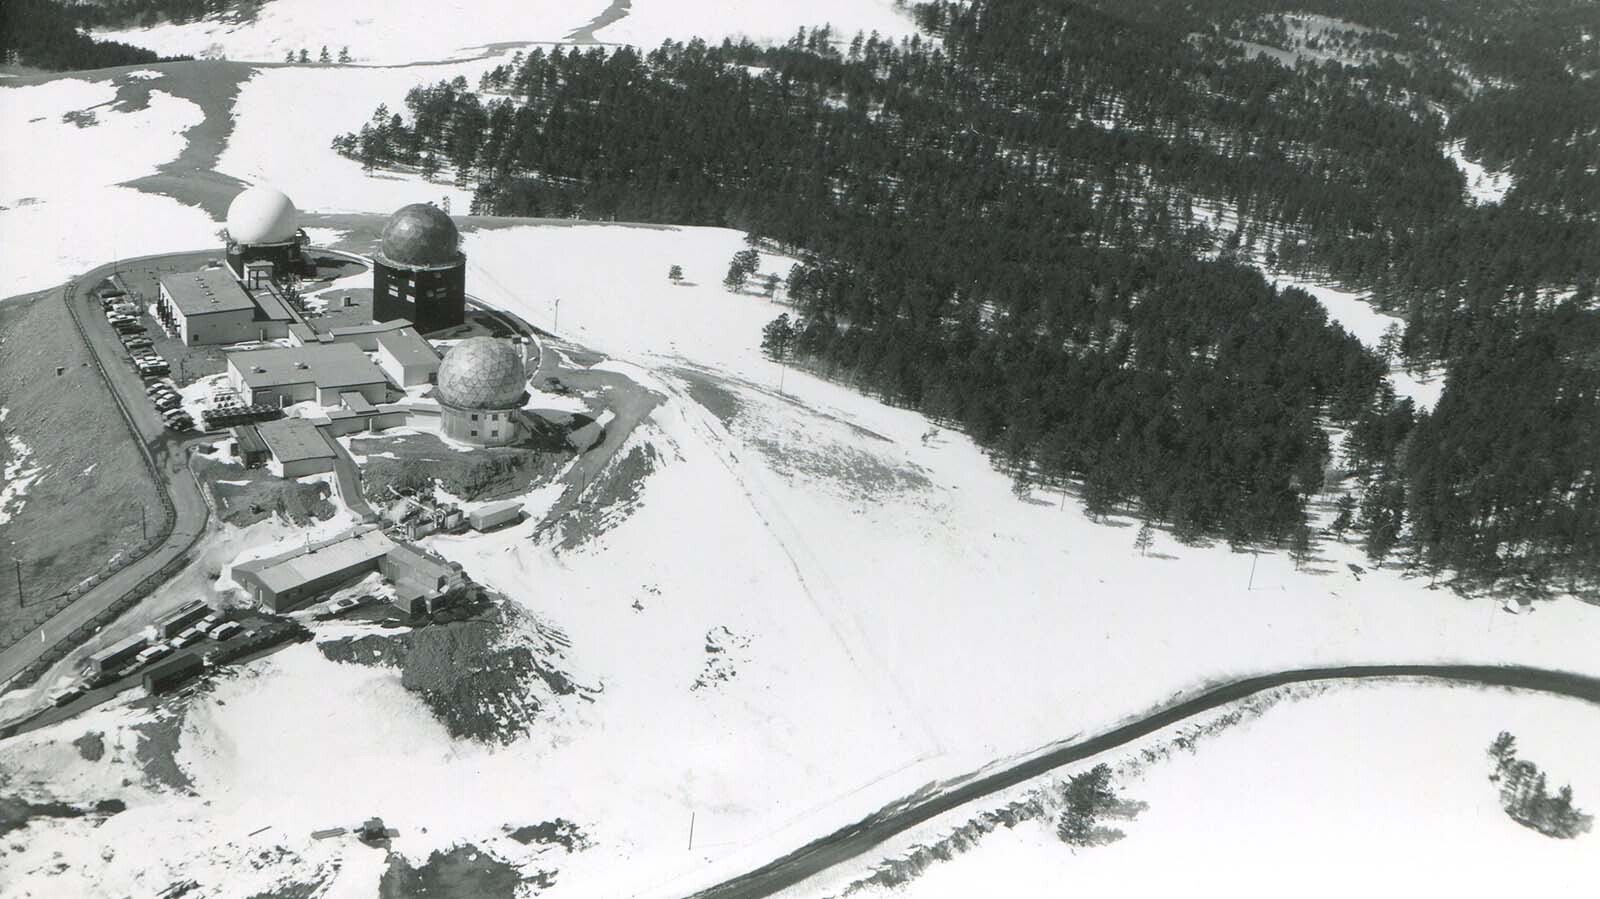 Aerial photograph of the first U.S. portable nuclear reactor facility near Sundance in the 1960s.